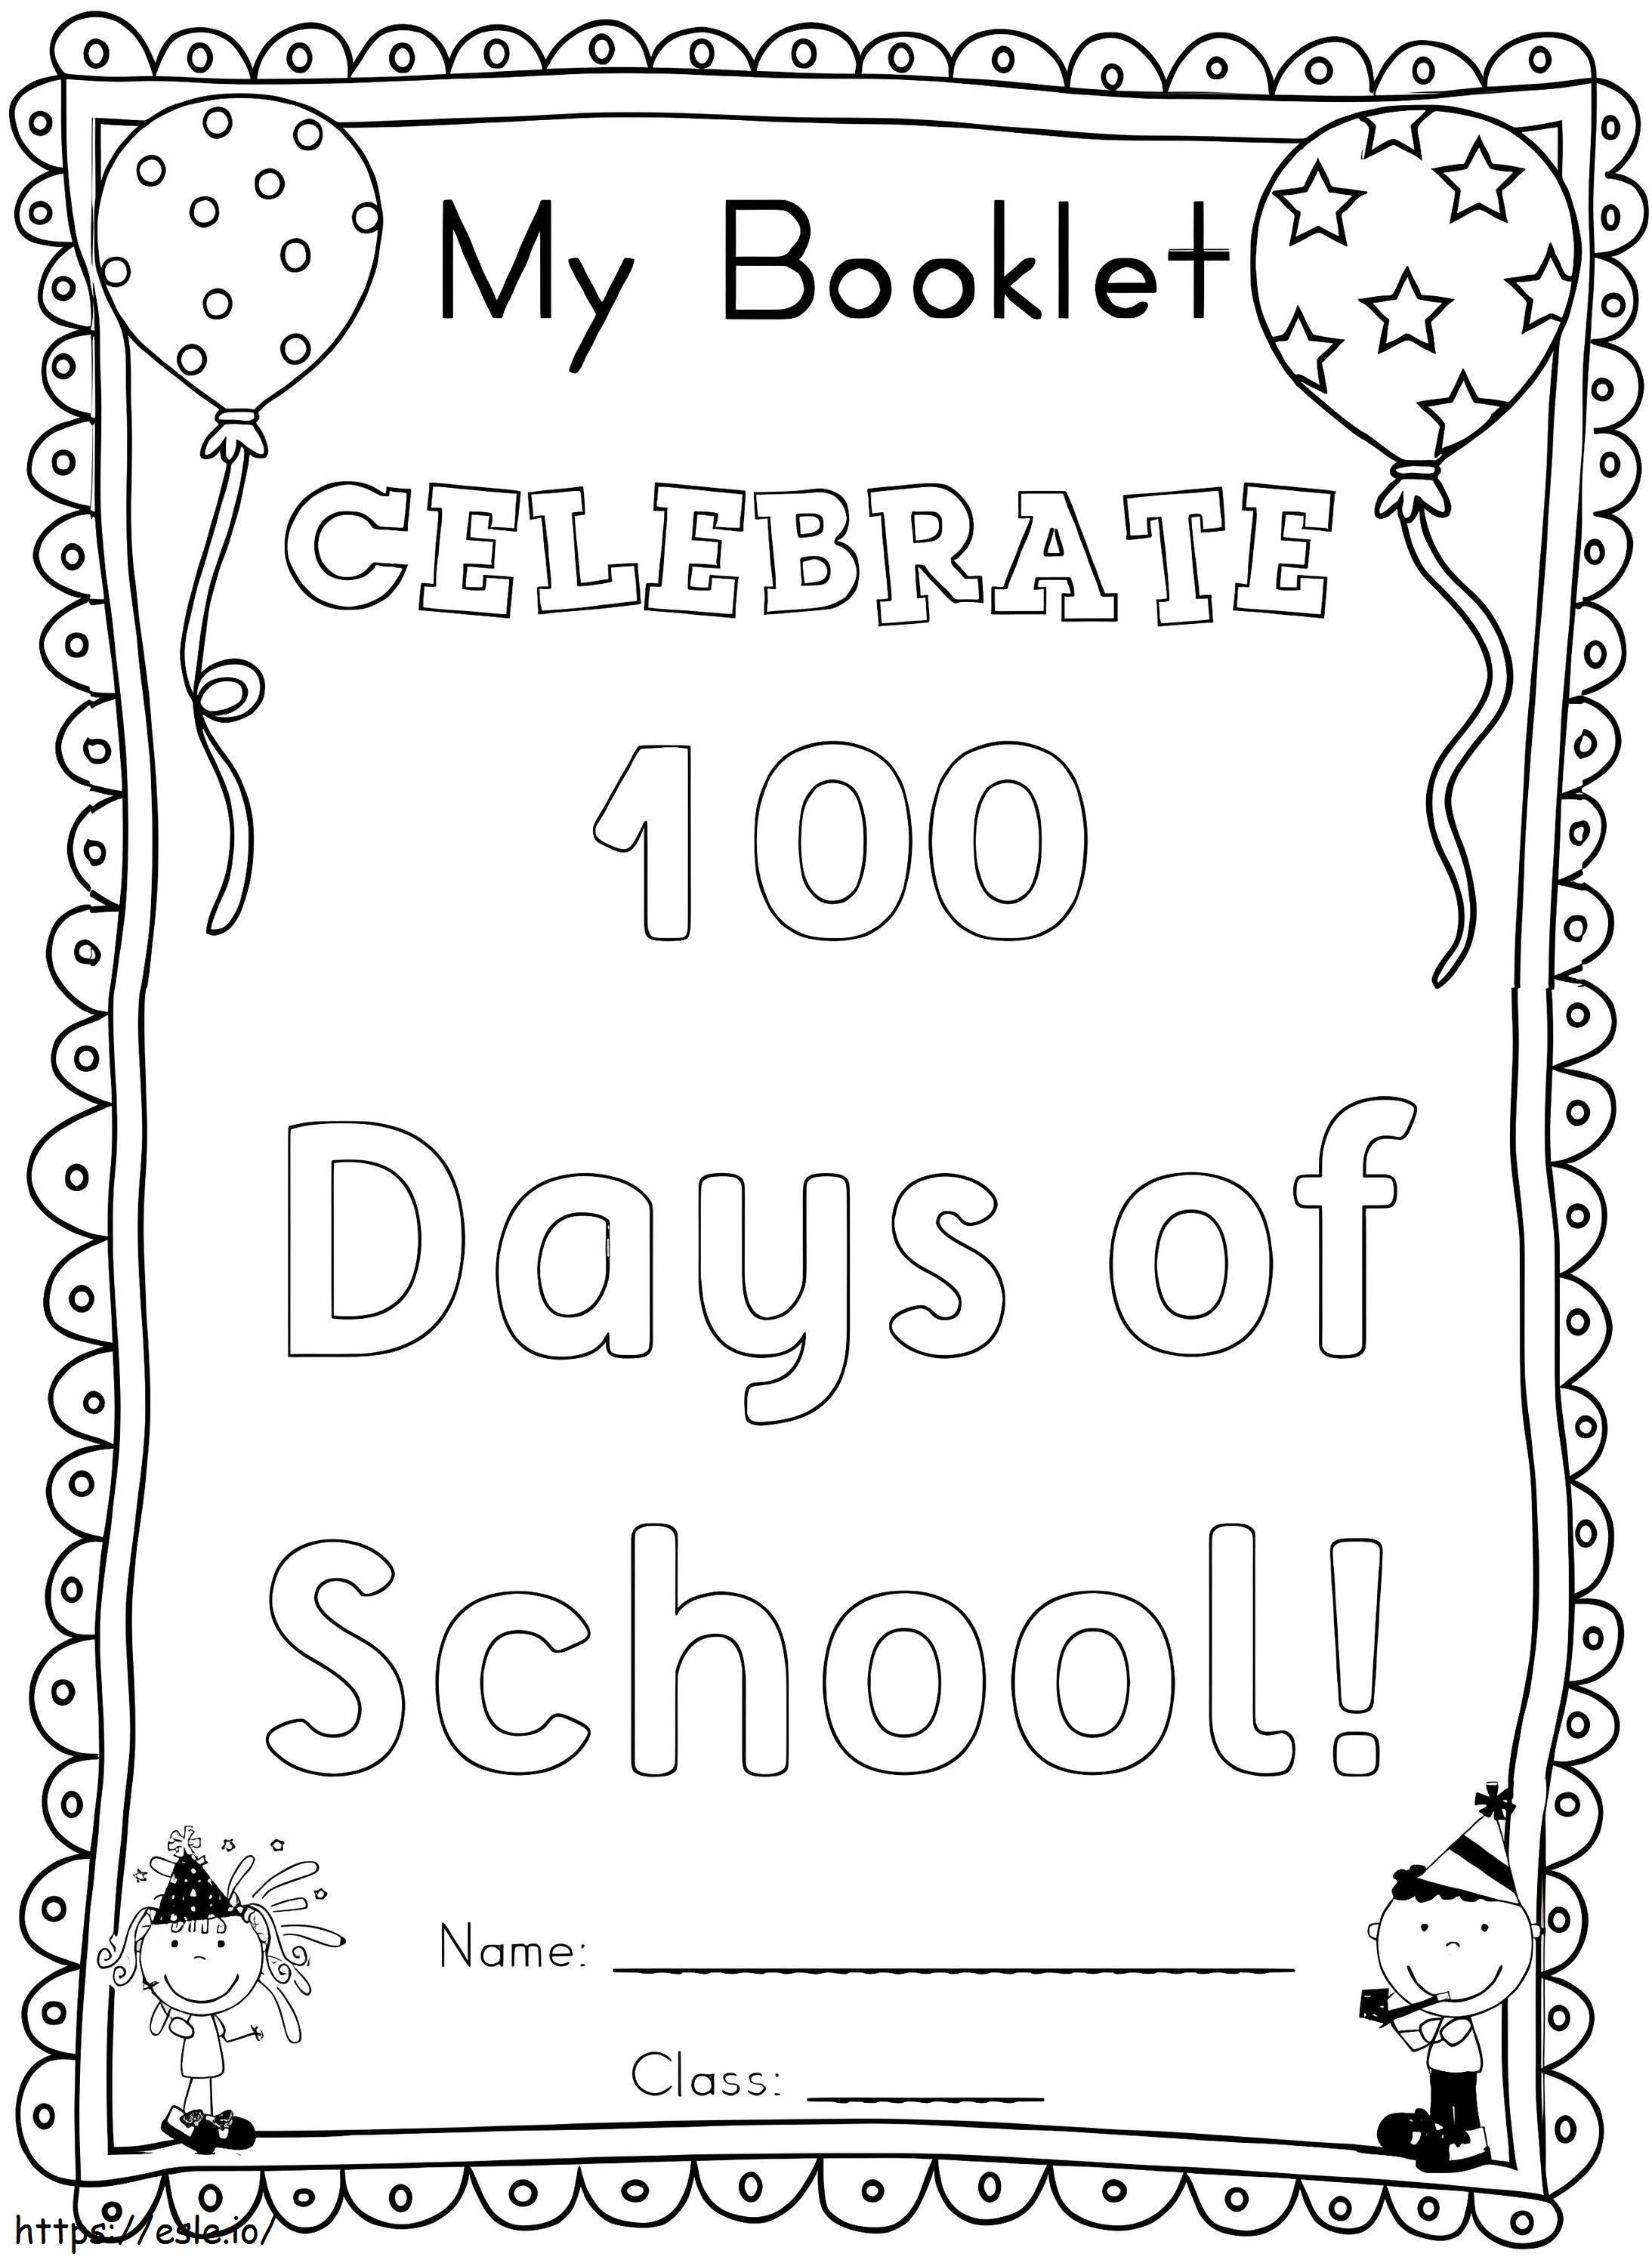 Celebrate 100 Day Of School coloring page